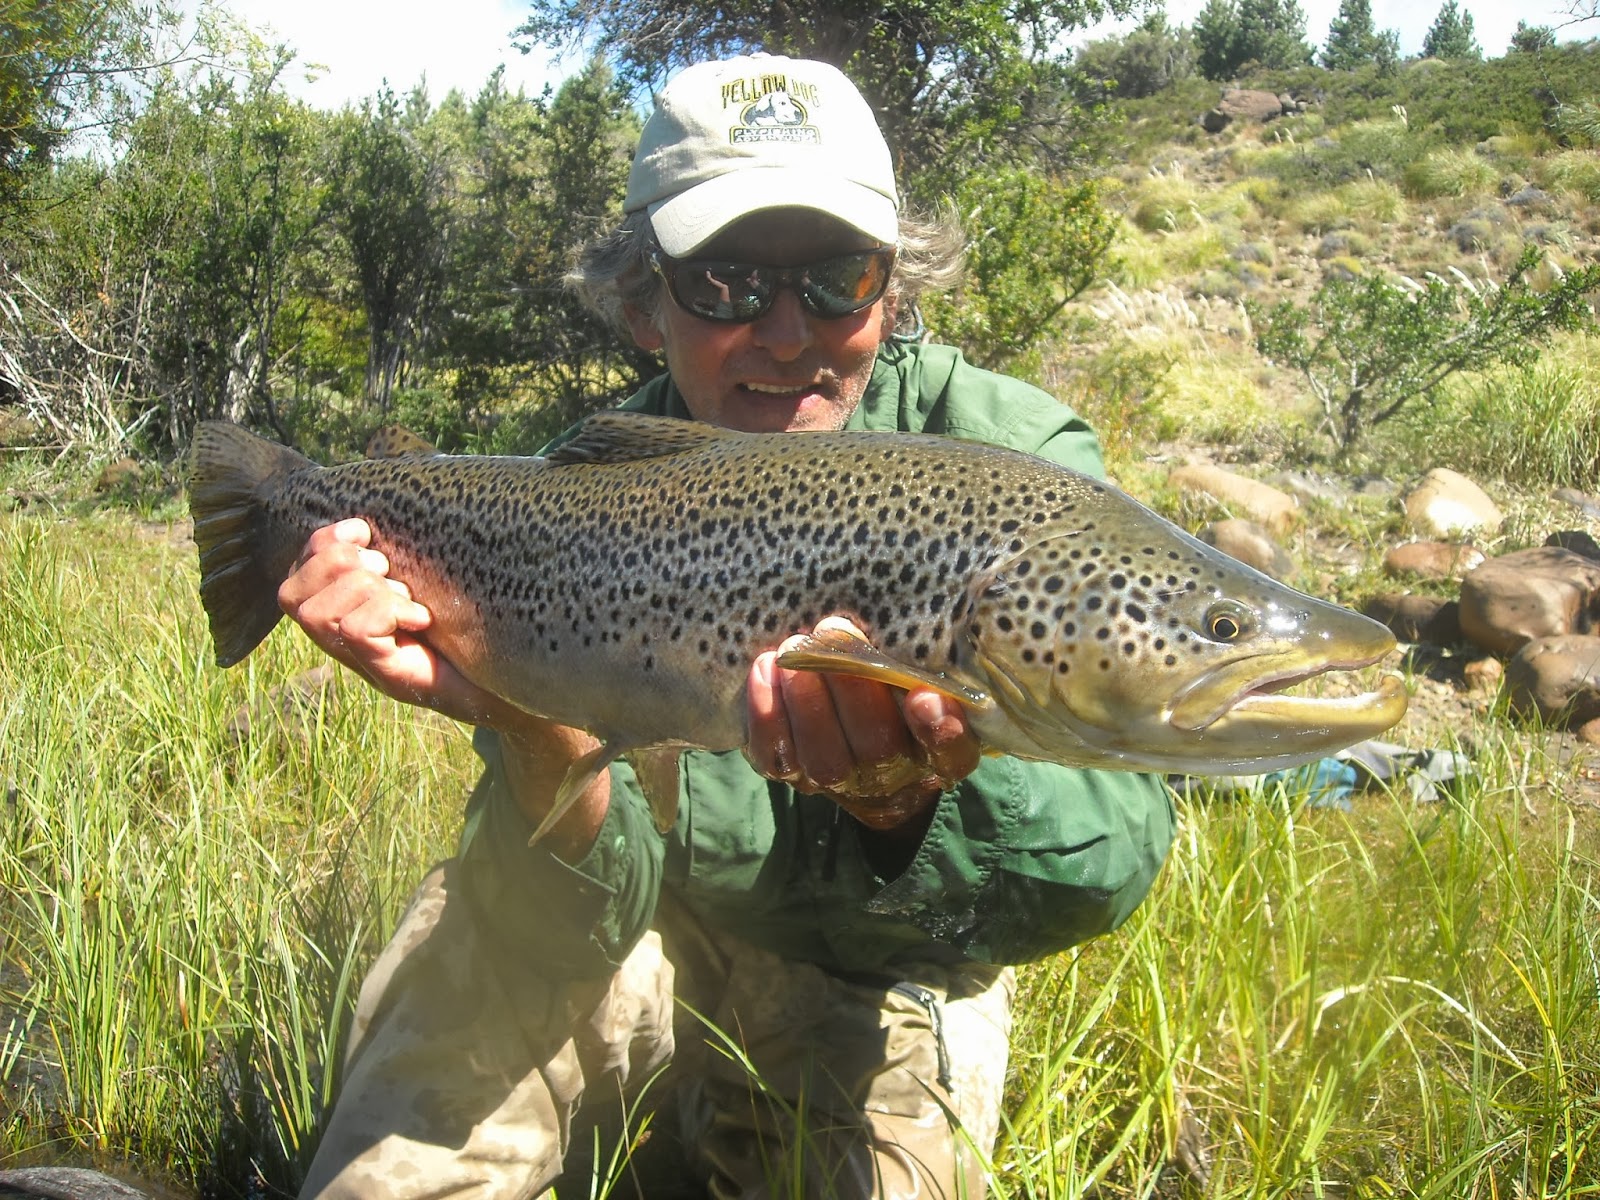 First Cast Fly Fishing: DIY Fly Fishing Patagonia Argentina and Chile: New  Hampshire Young Buc's Walk, Float, Travel